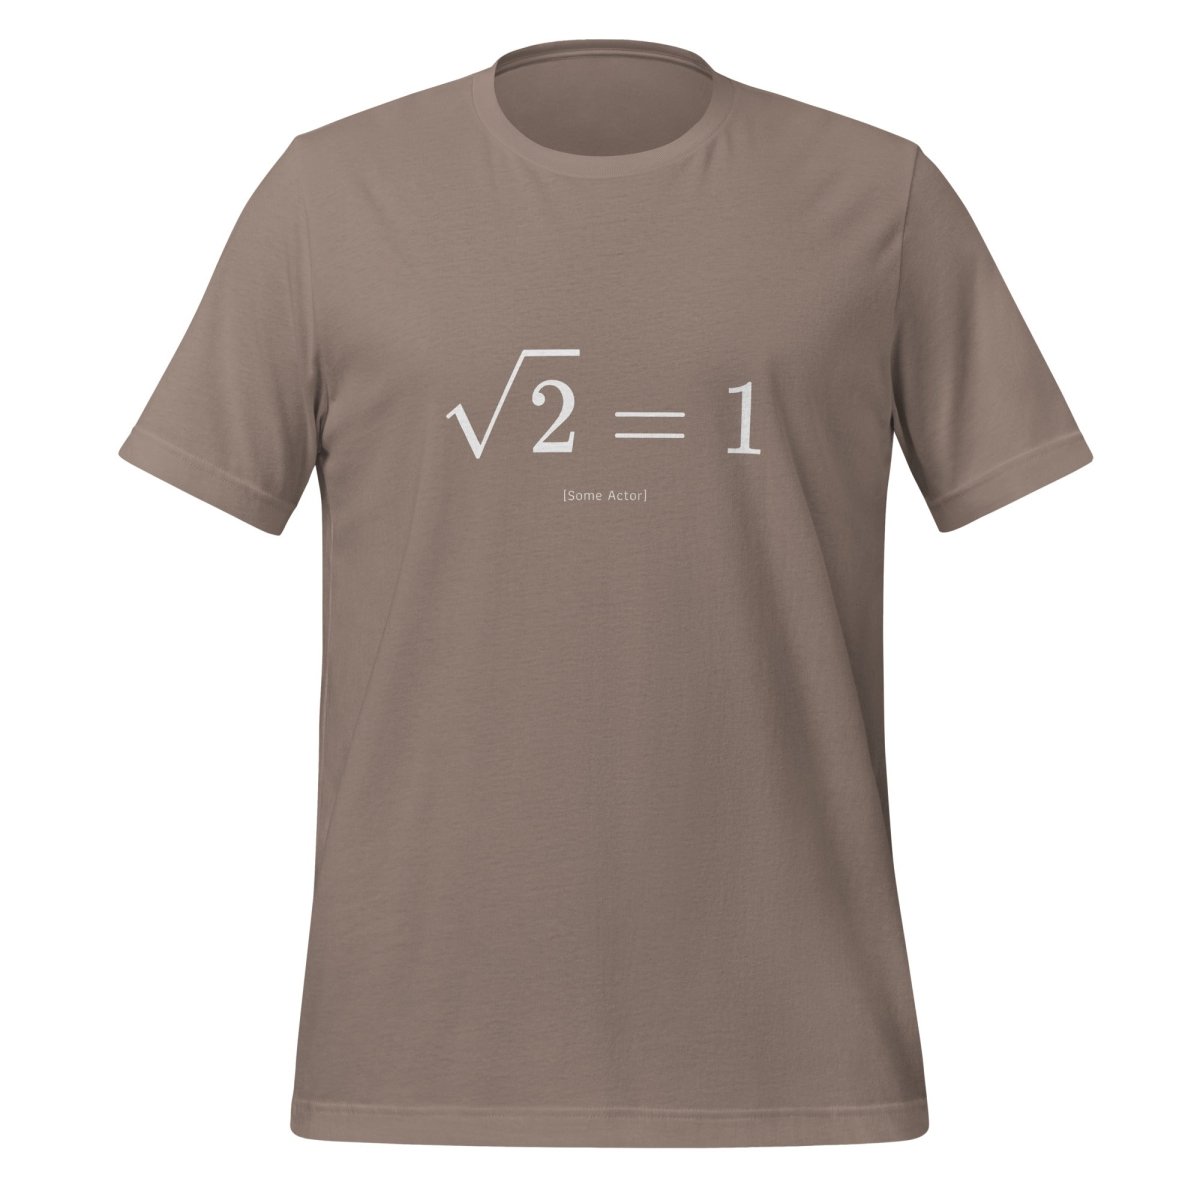 The Square Root of 2 Equals 1 T - Shirt (unisex) - Pebble - AI Store